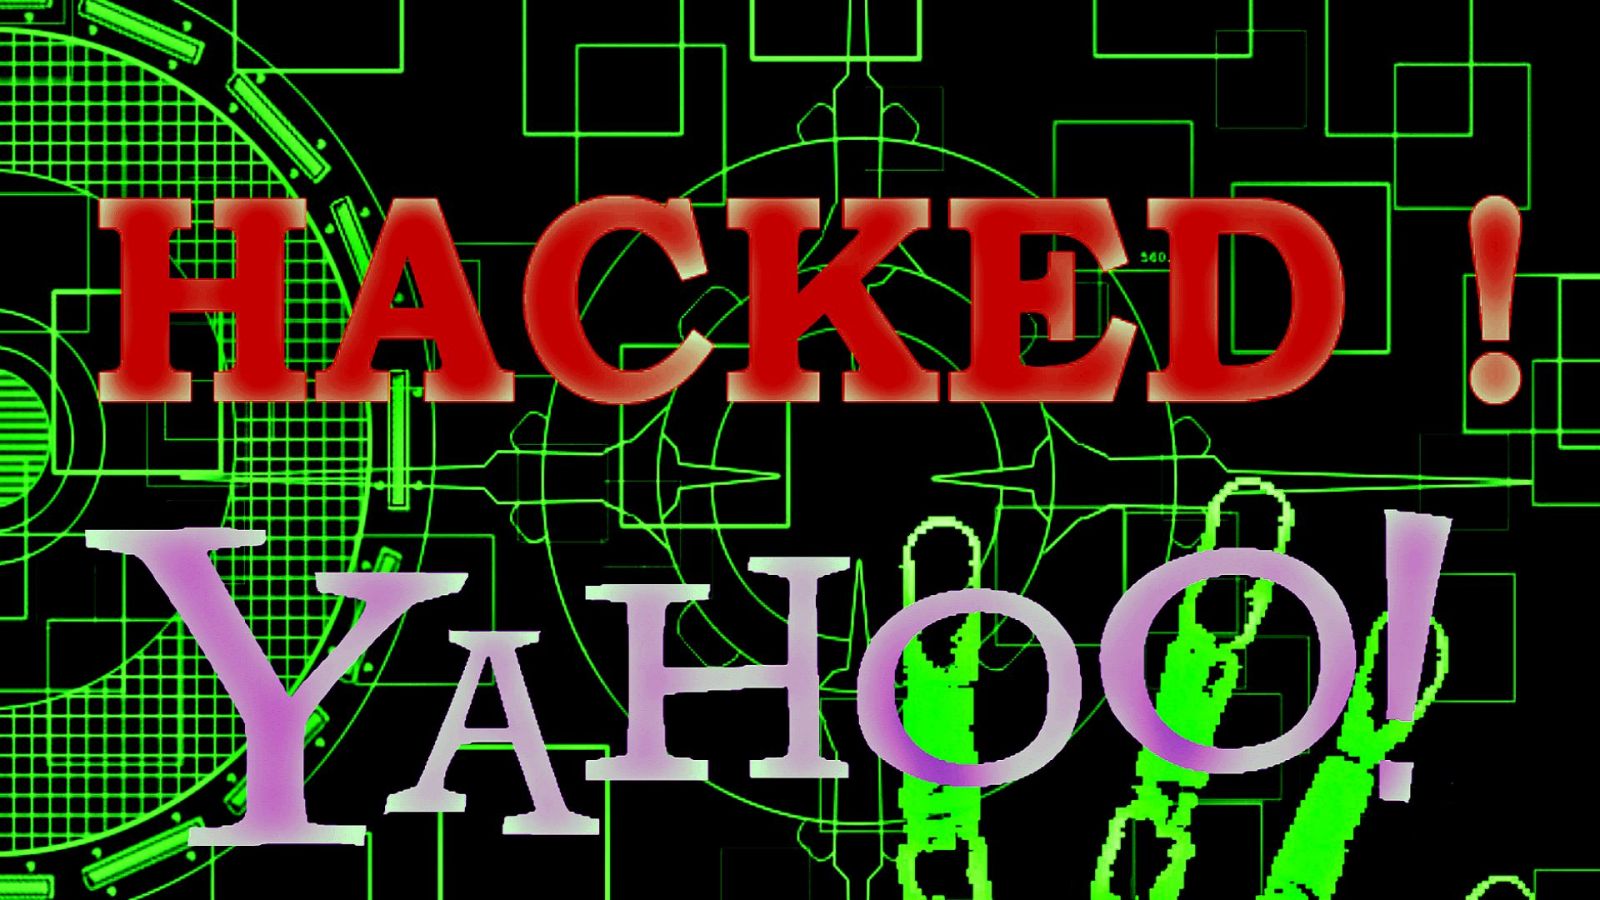 Yahoo security breached in world record hack